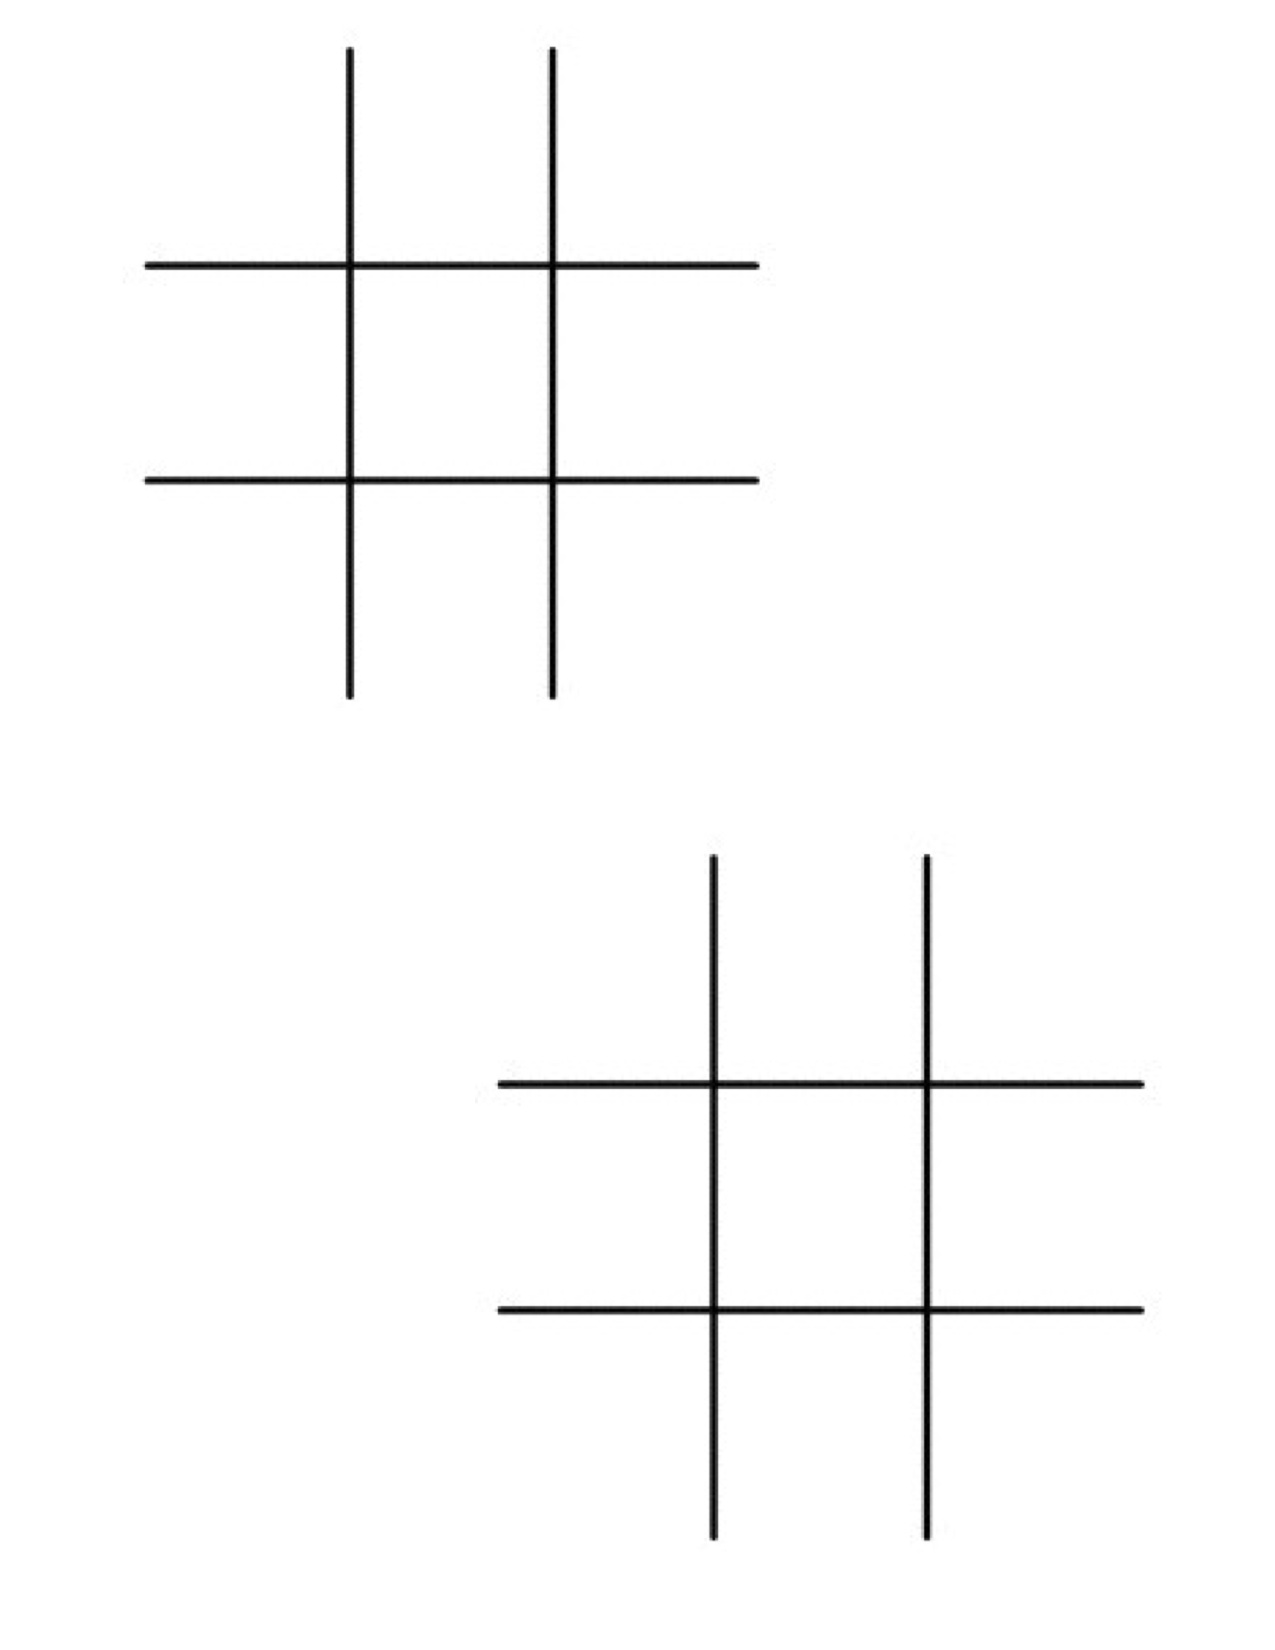 The Many Names of Tic-Tac-Toe